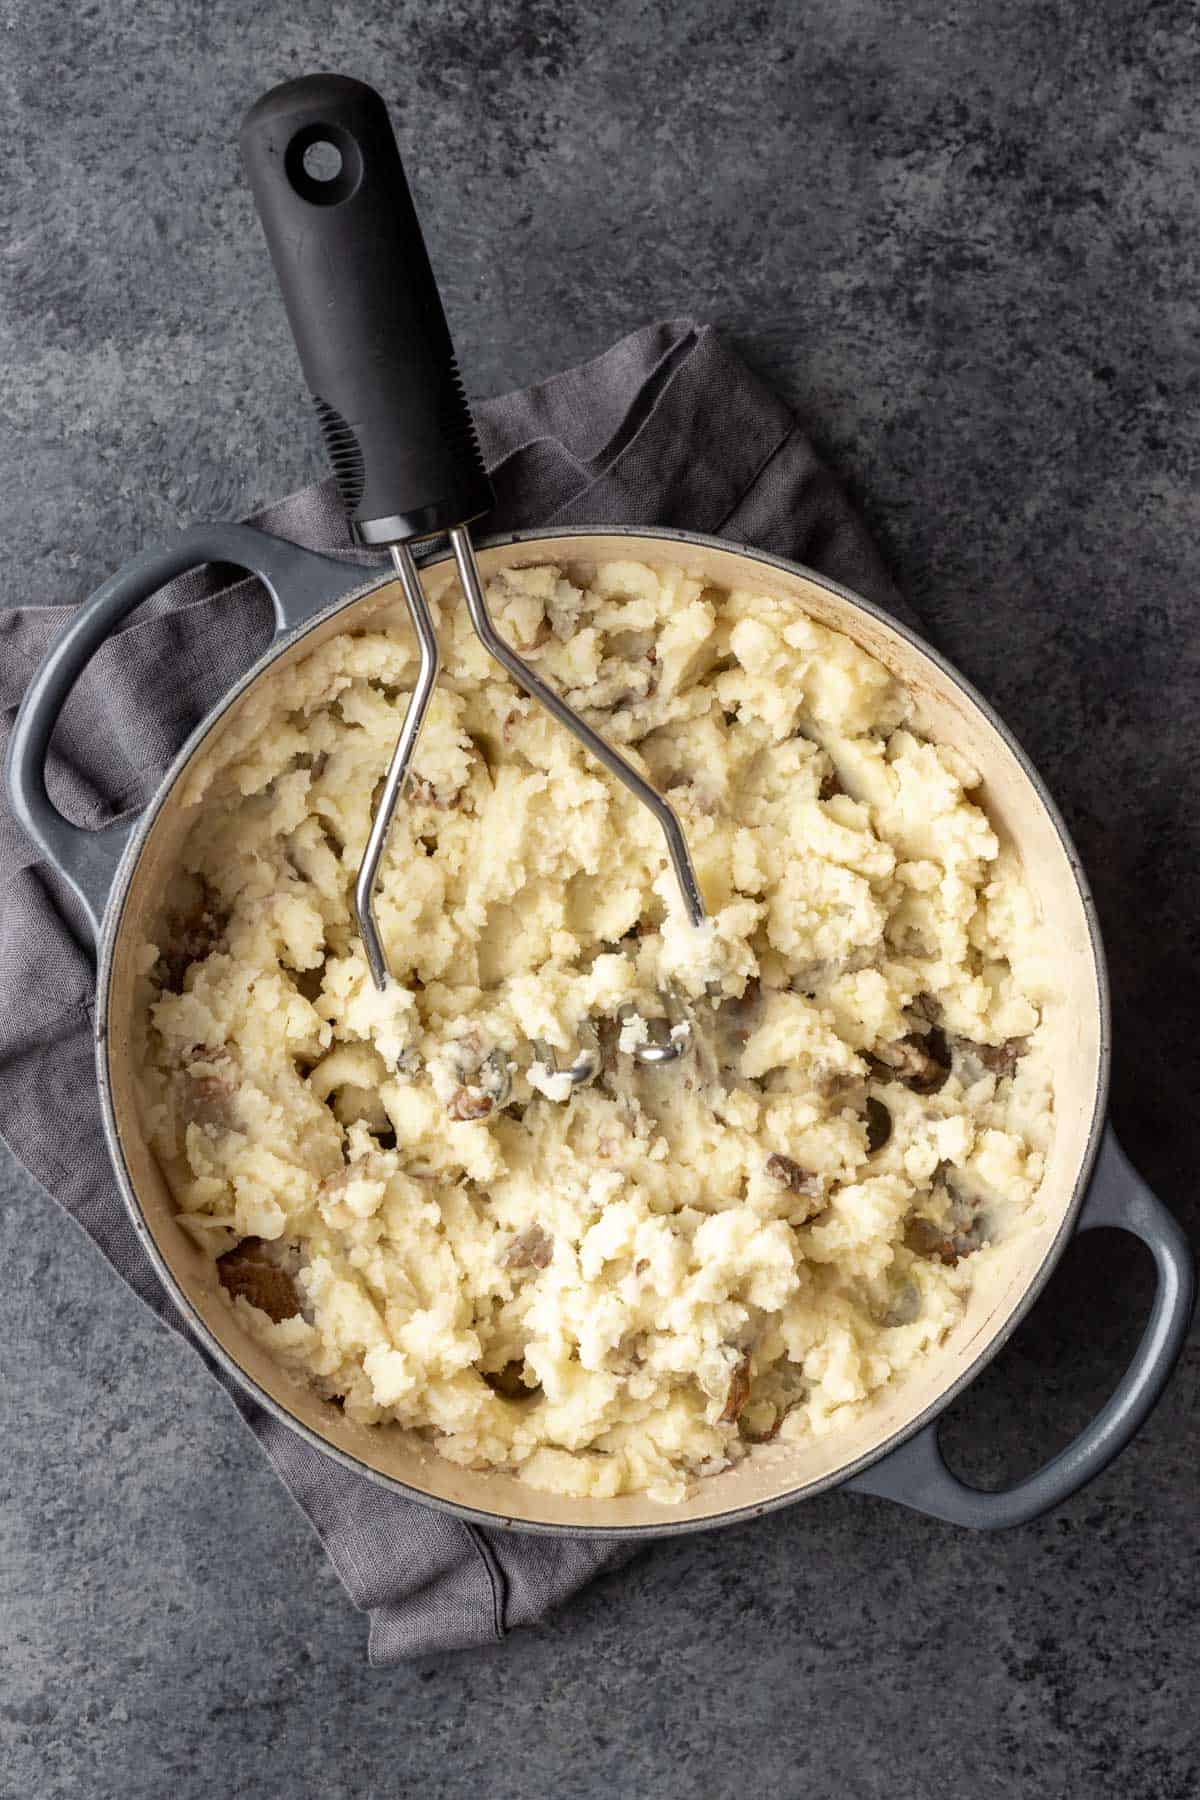 Mashed potatoes in a large pot with a potato masher.